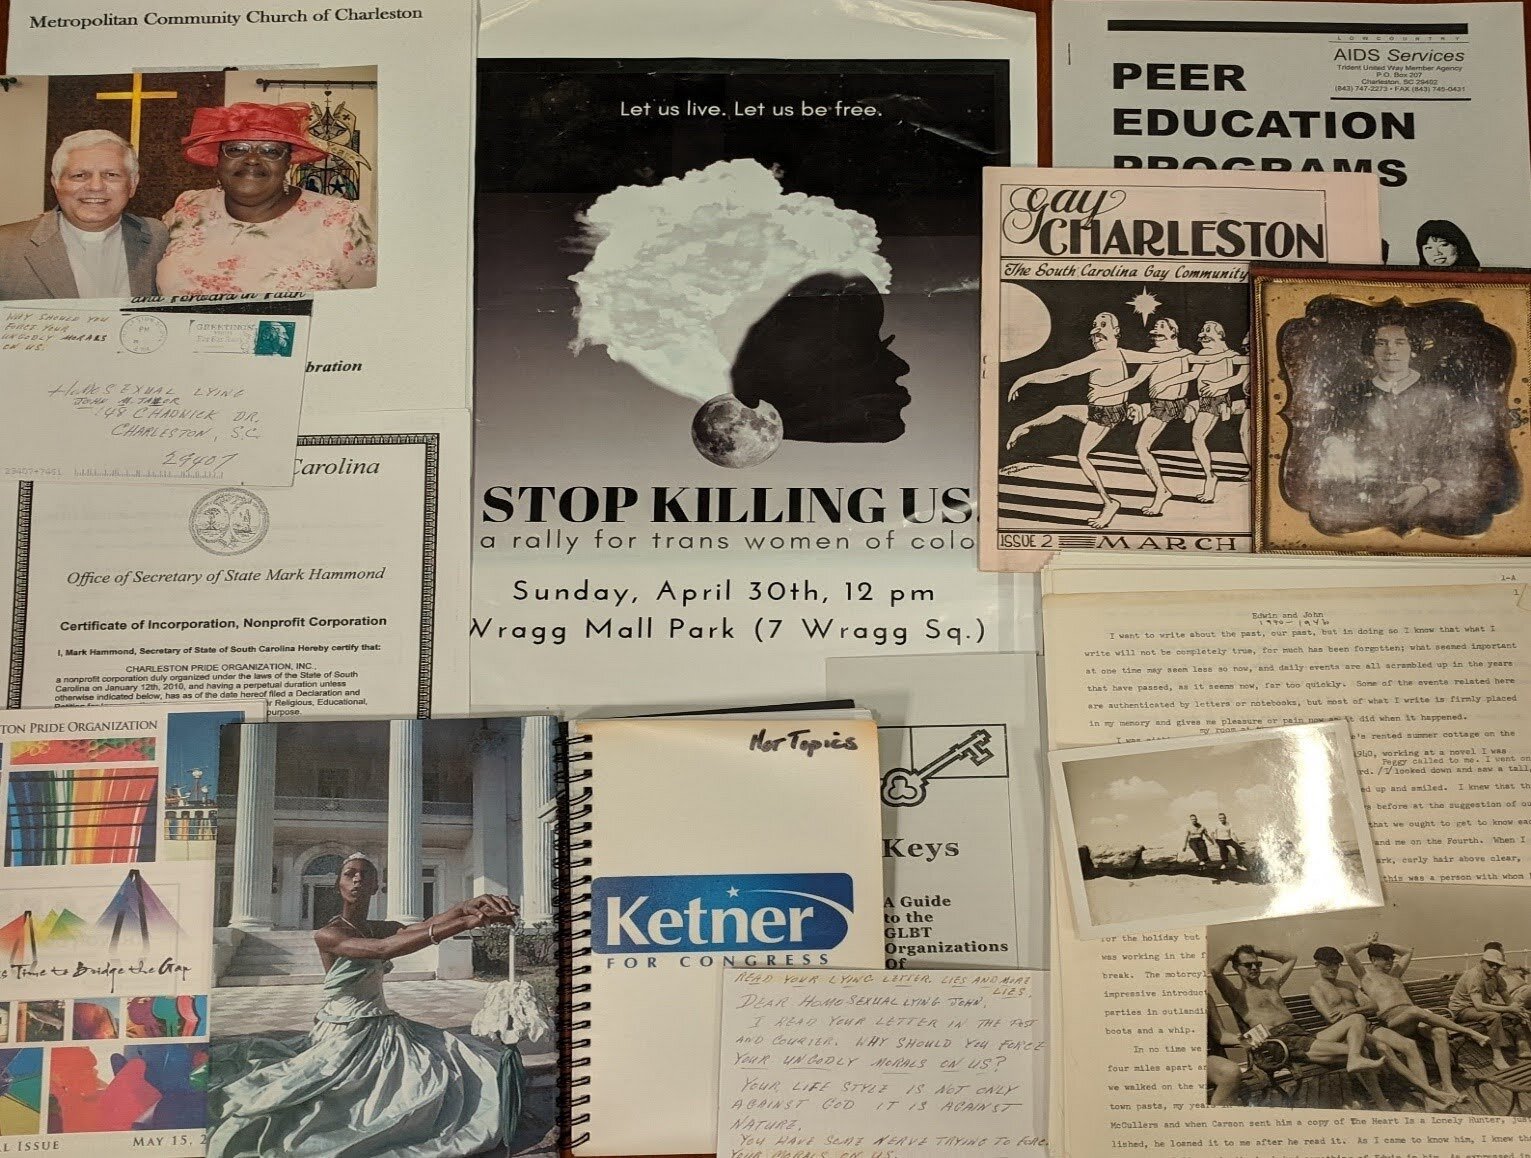 Photos, letters, and other items from the College of Charleston’s Documenting LGBTQ Life in the Lowcountry Project, one of the only initiatives solely dedicated to preserving and documenting lesbian, gay, bisexual and transgender histories in South …